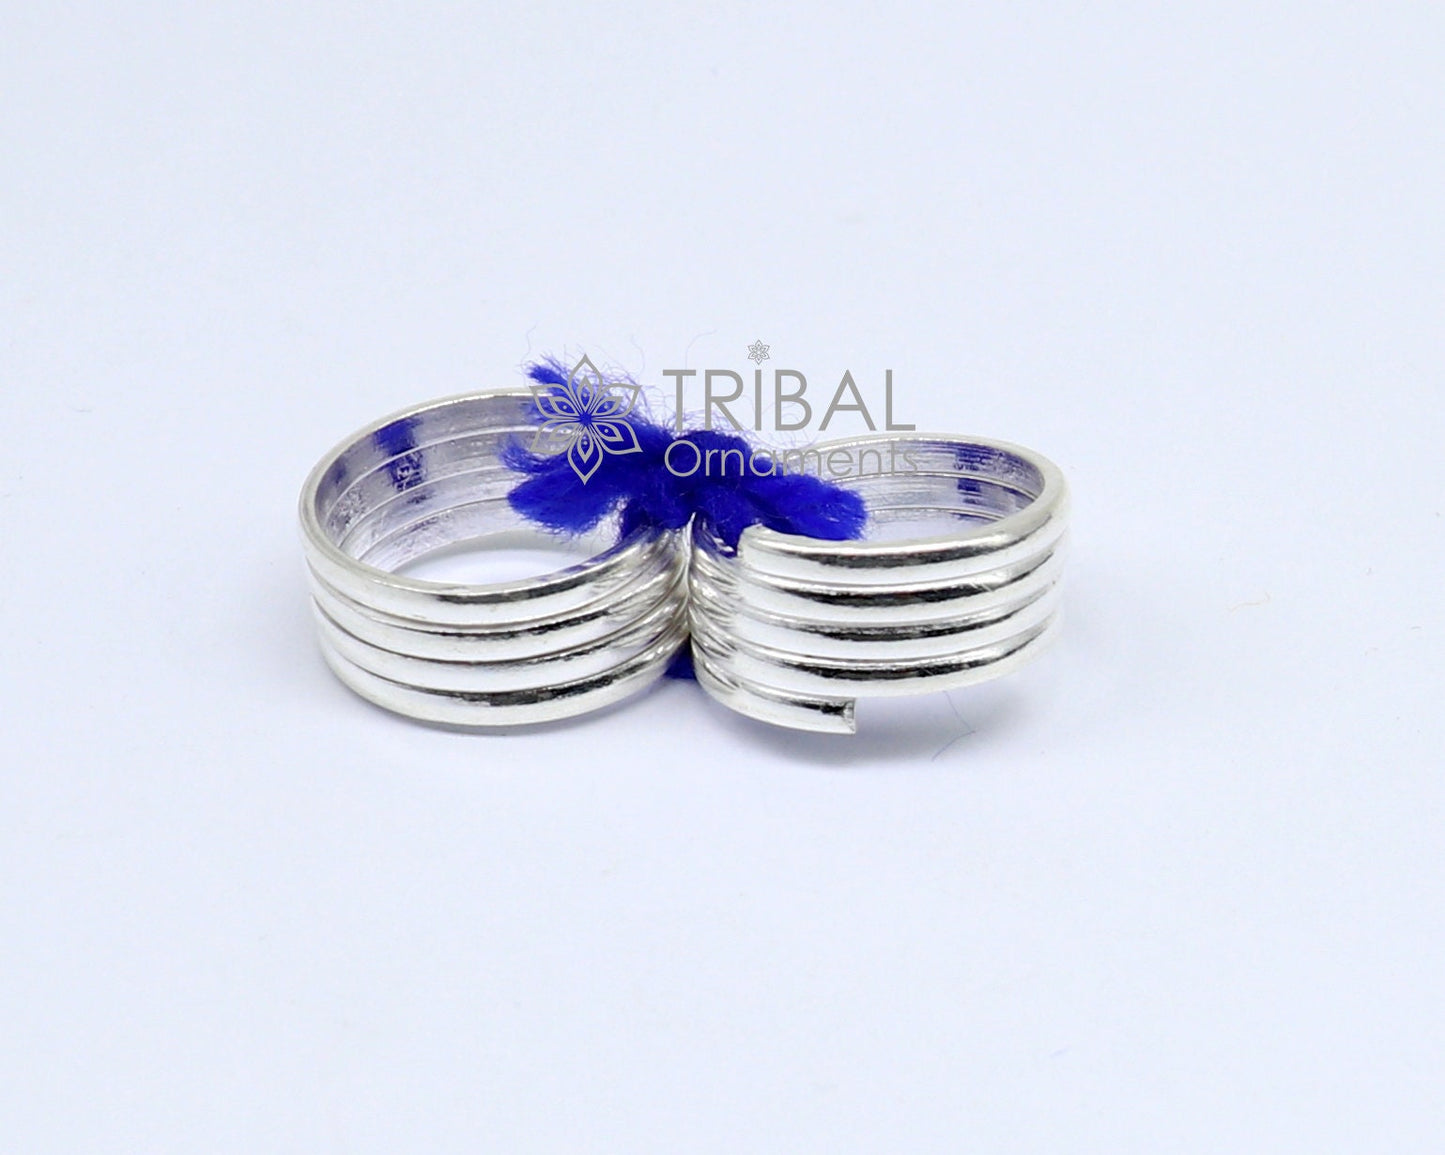 Indian Ethnic style handmade solid silver spiral design toe rings pair, excellent tribal customized belly dance hippie & boho jewelry ntr84 - TRIBAL ORNAMENTS